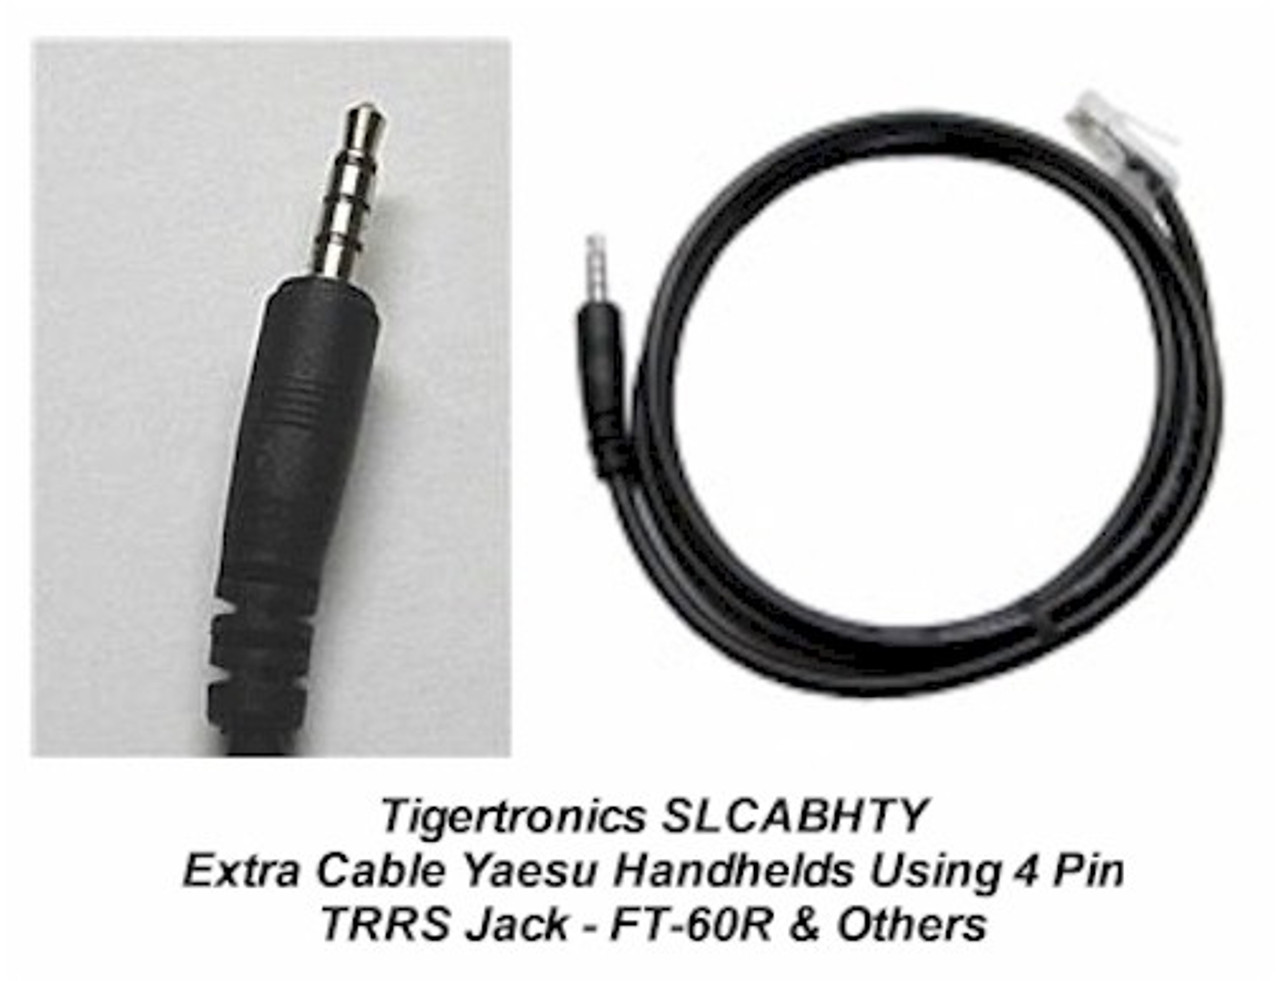 Signalink SLCABHTY Cable - This radio cable is compatible with the Elecraft K3's rear panel Audio In/Out and PTT jacks only.